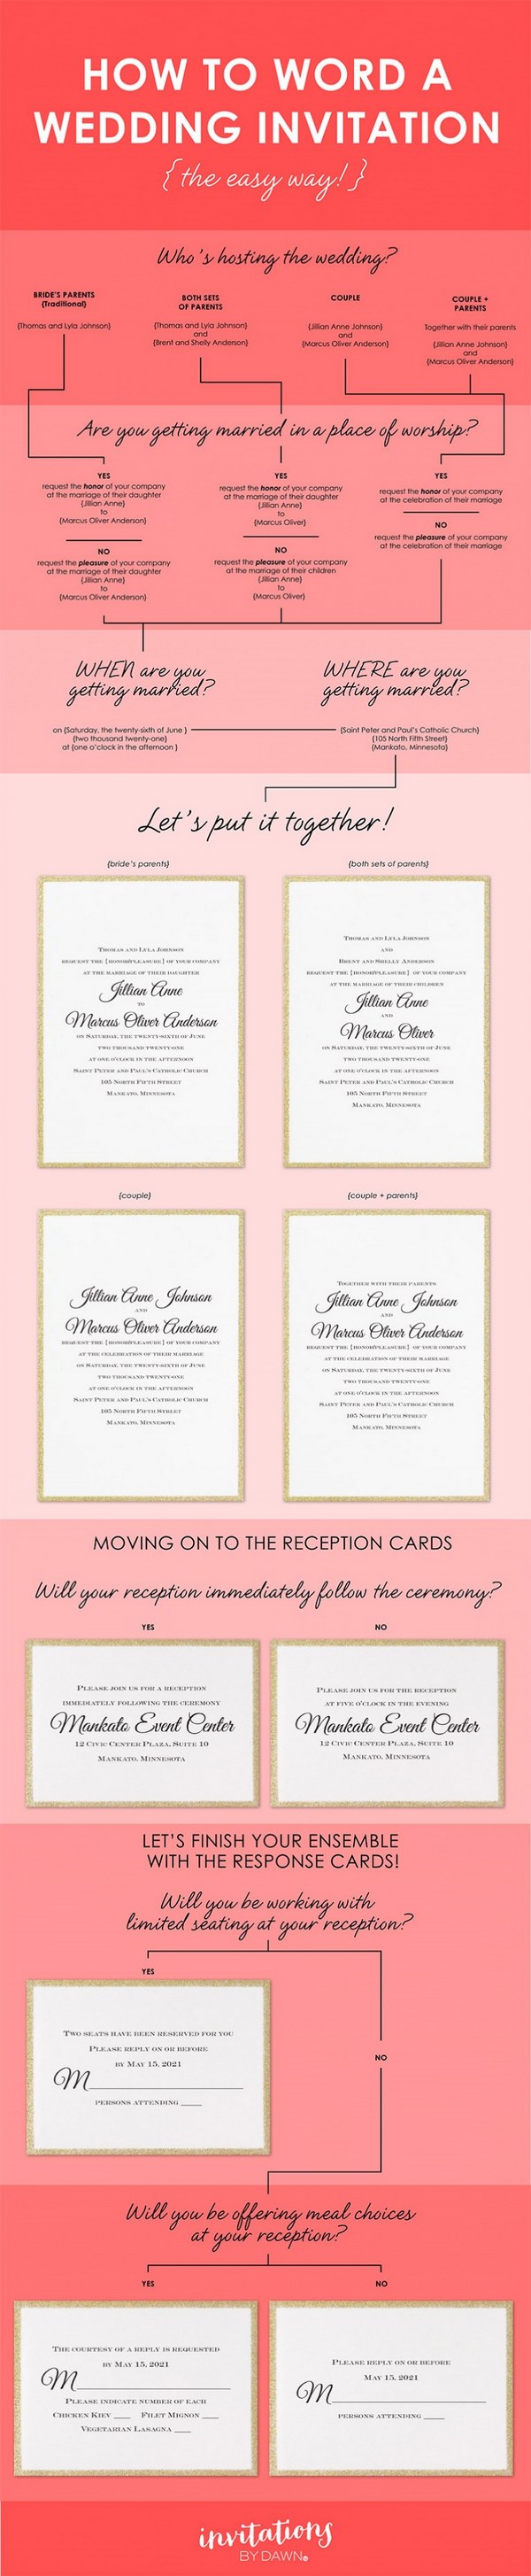 how to word your wedding invitations